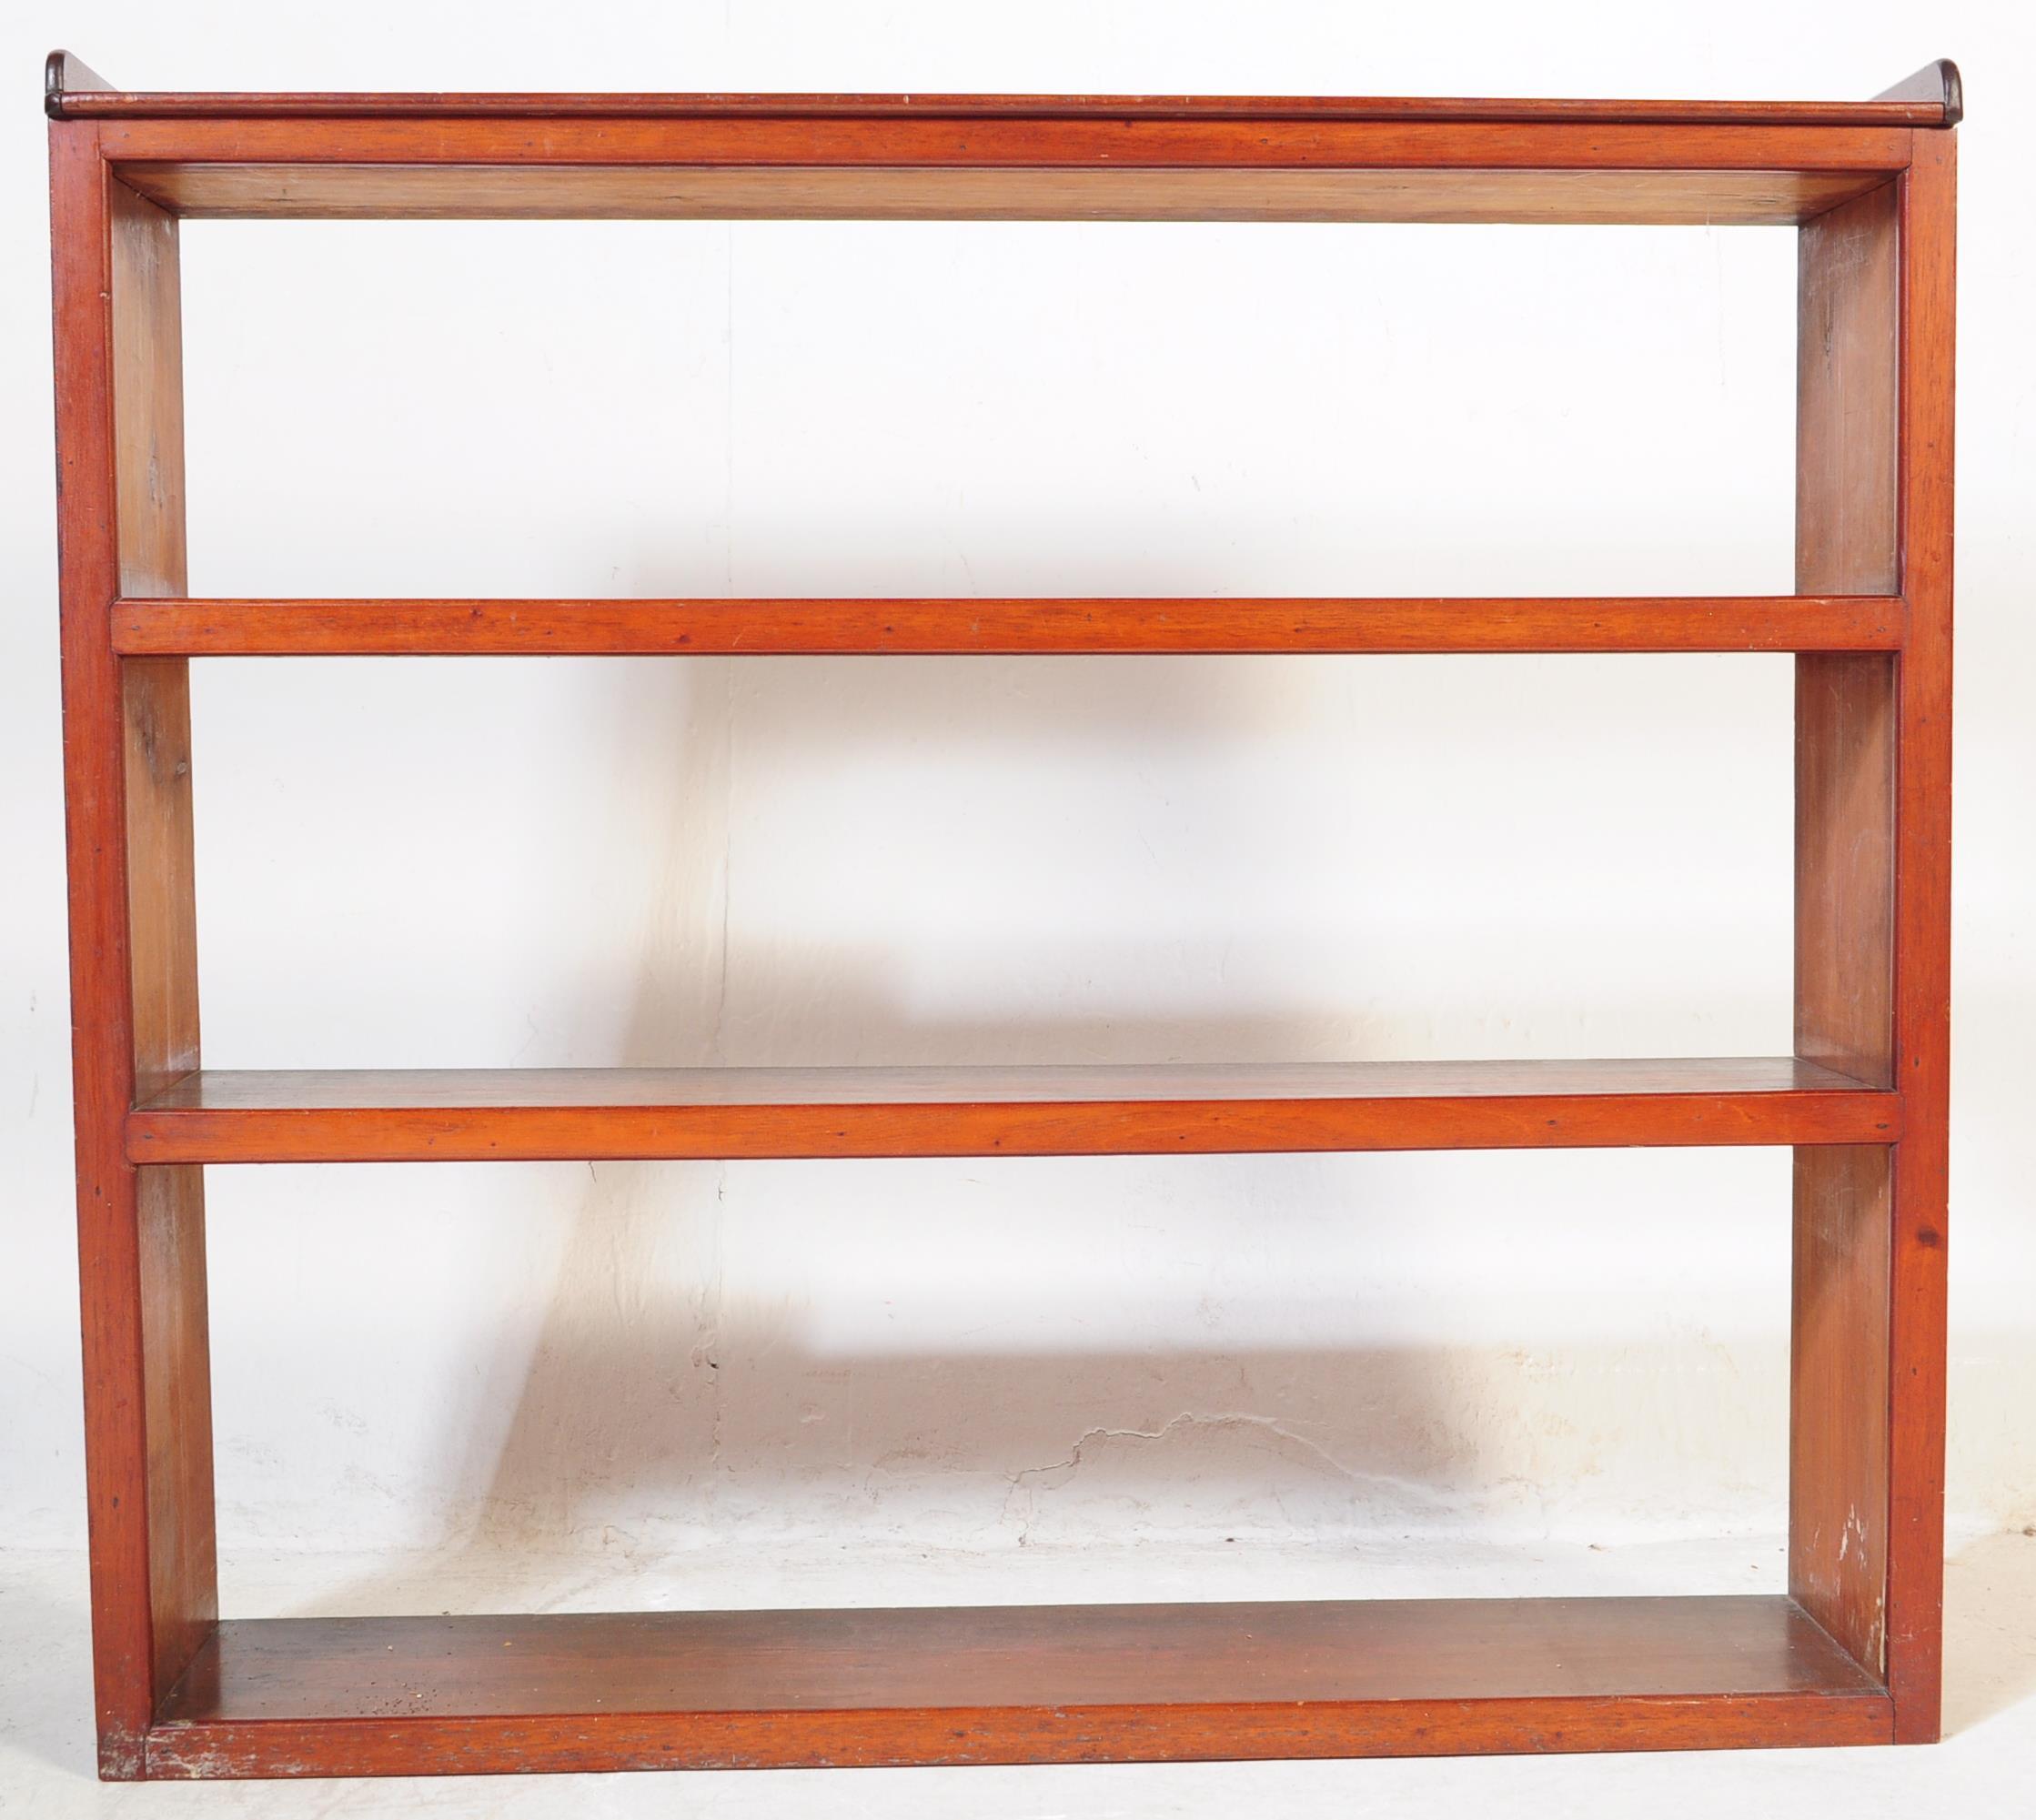 VINTAGE 20TH CENTURY MAHOGANY OPEN FACE BOOKCASE - Image 3 of 5